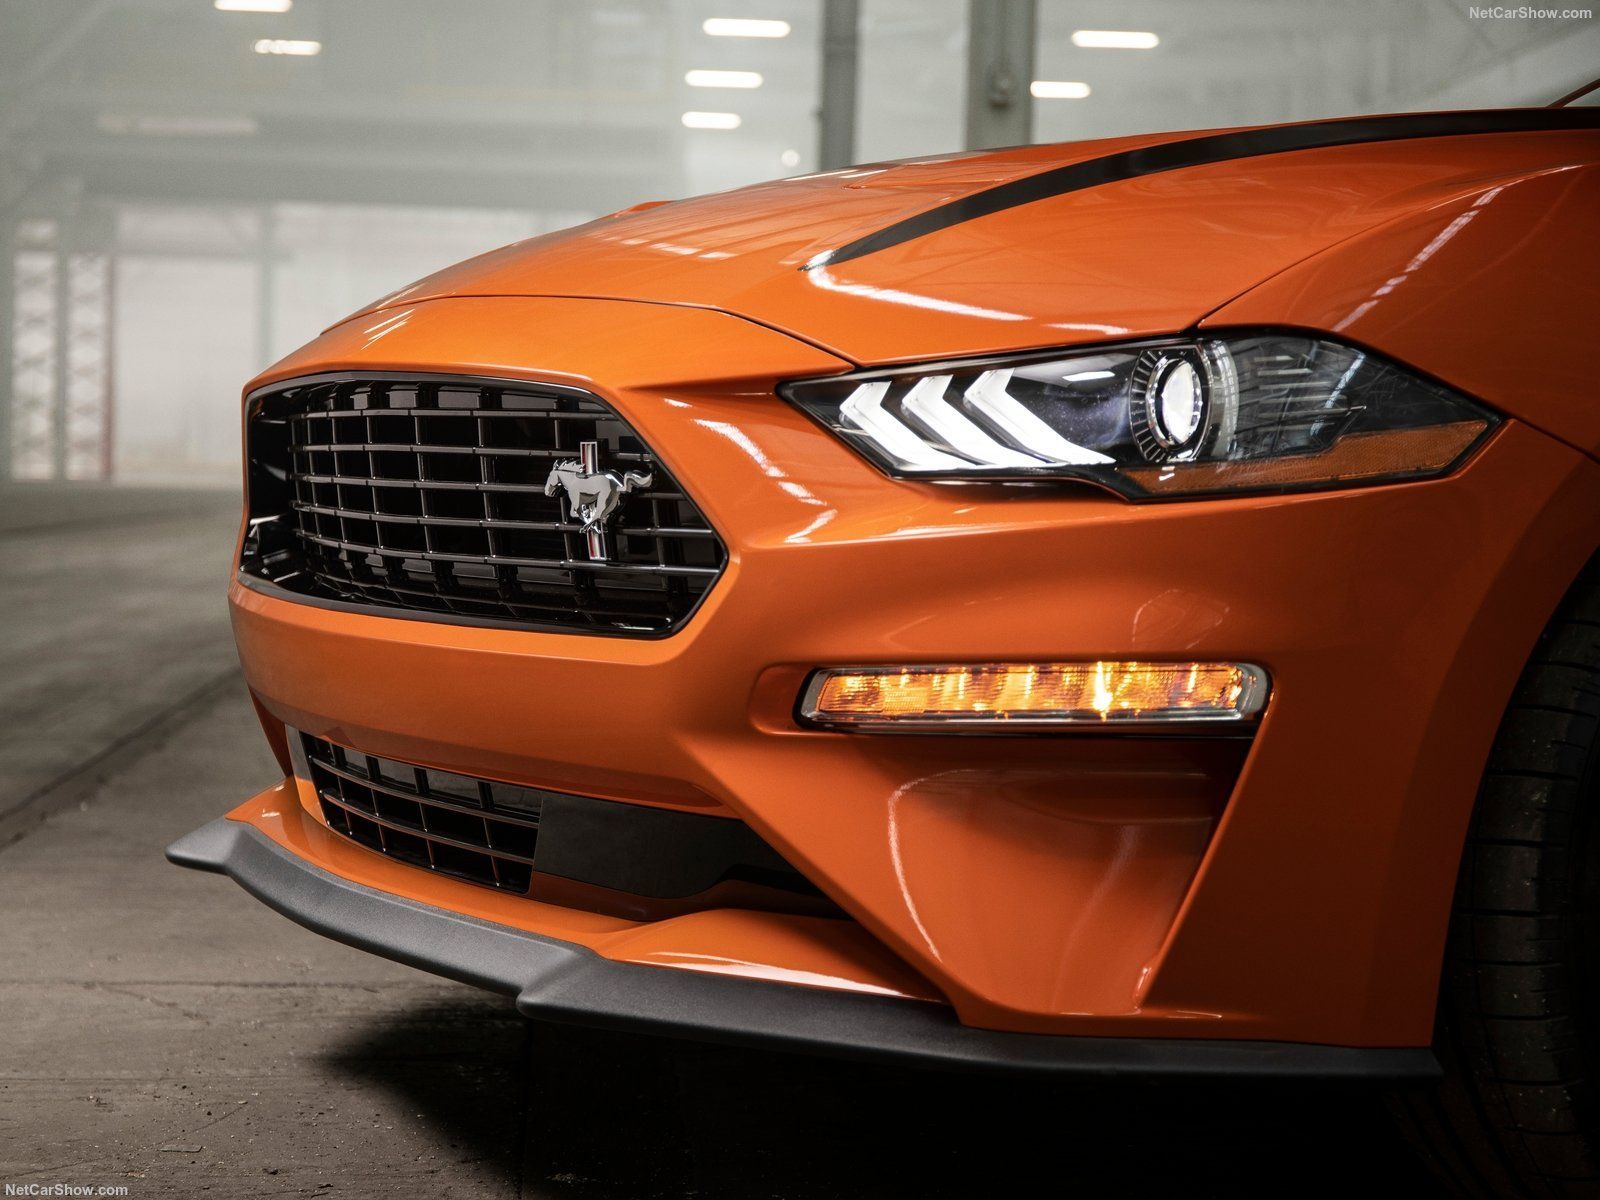 A first look at the Ford Mustang hybrid?